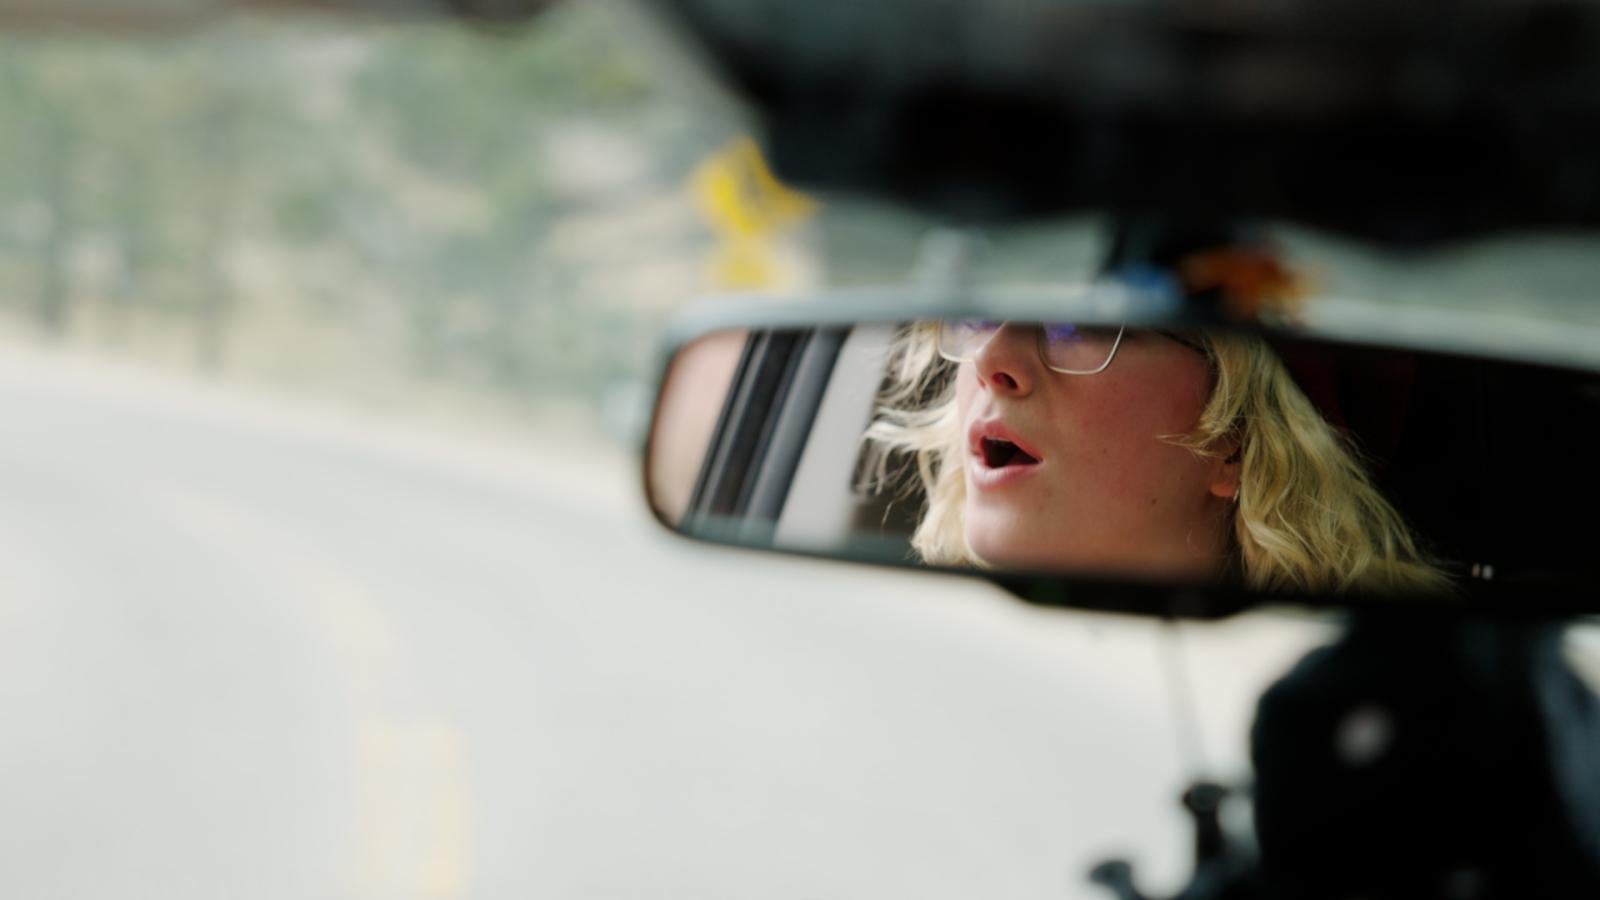 Reflection of woman in car rearview mirror